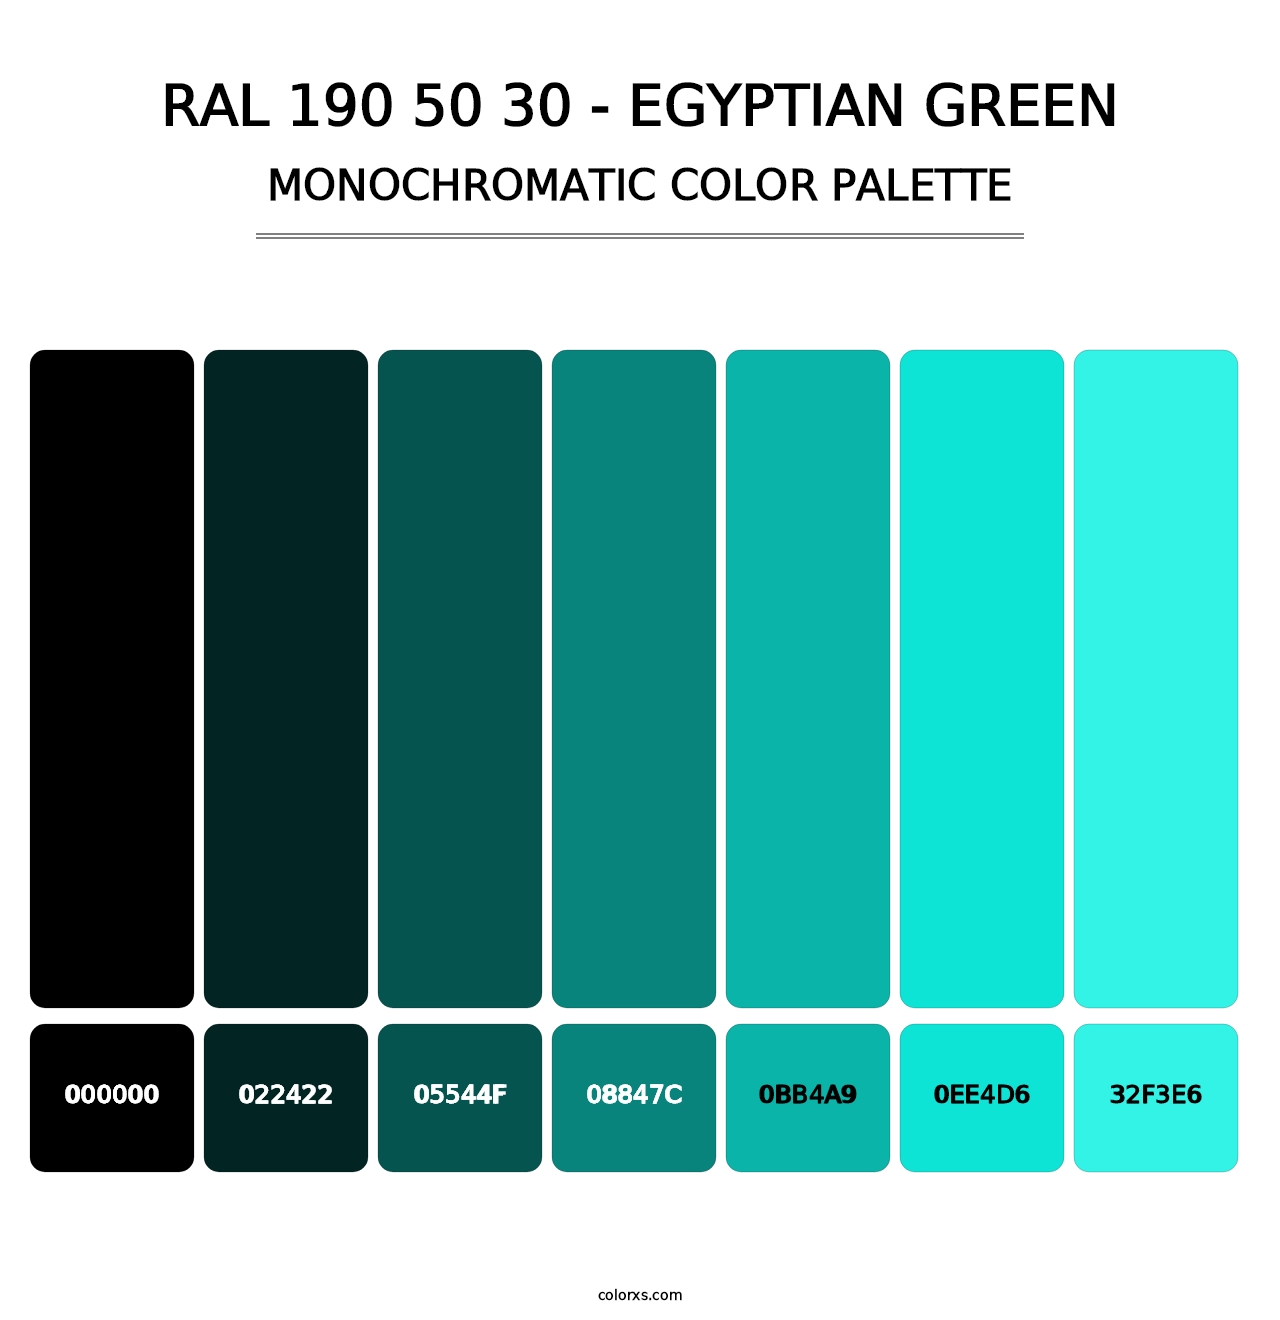 RAL 190 50 30 - Egyptian Green - Monochromatic Color Palette